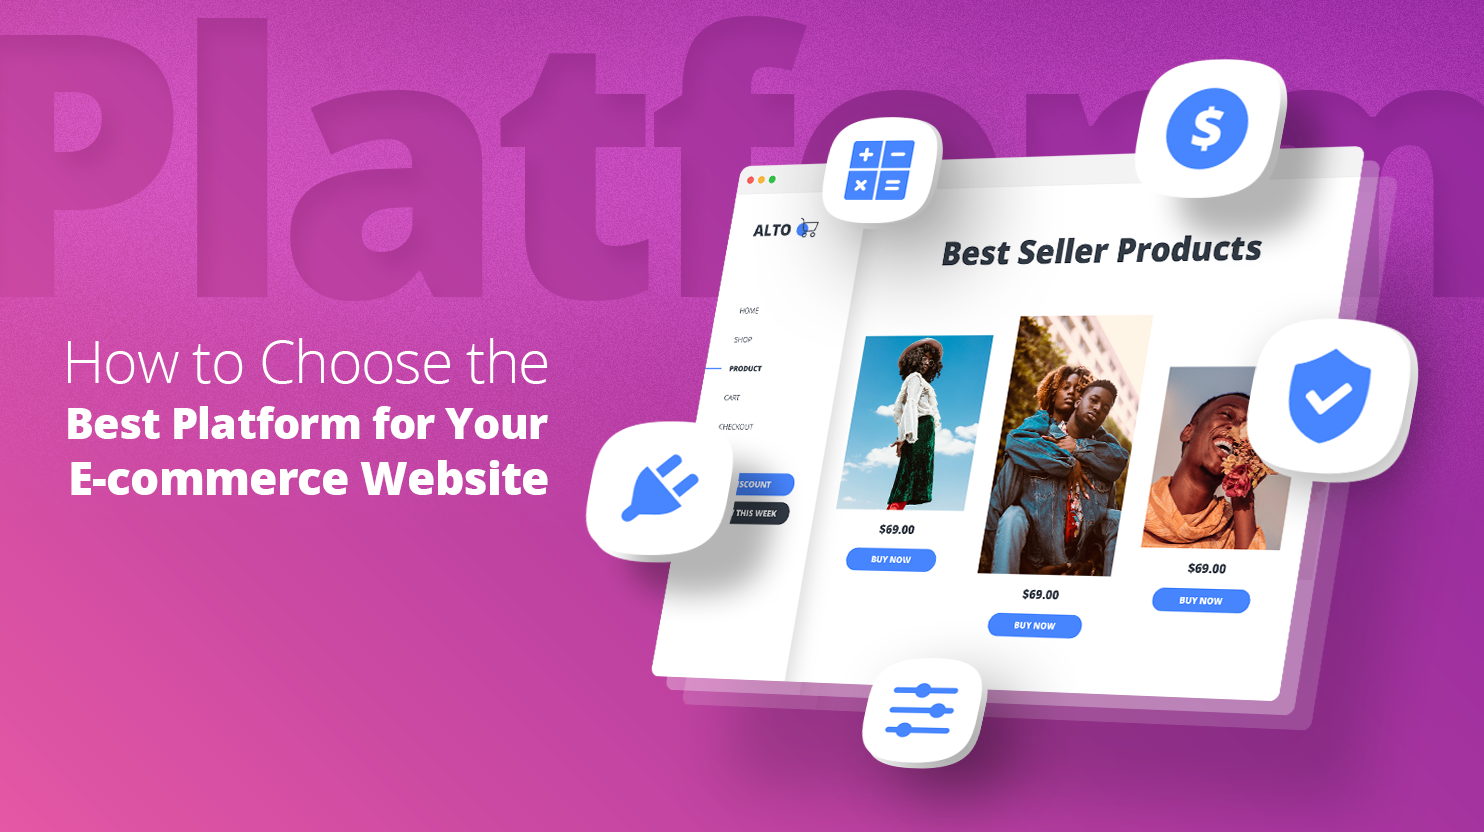 How to Choose the Best Platform for Your E-commerce Website